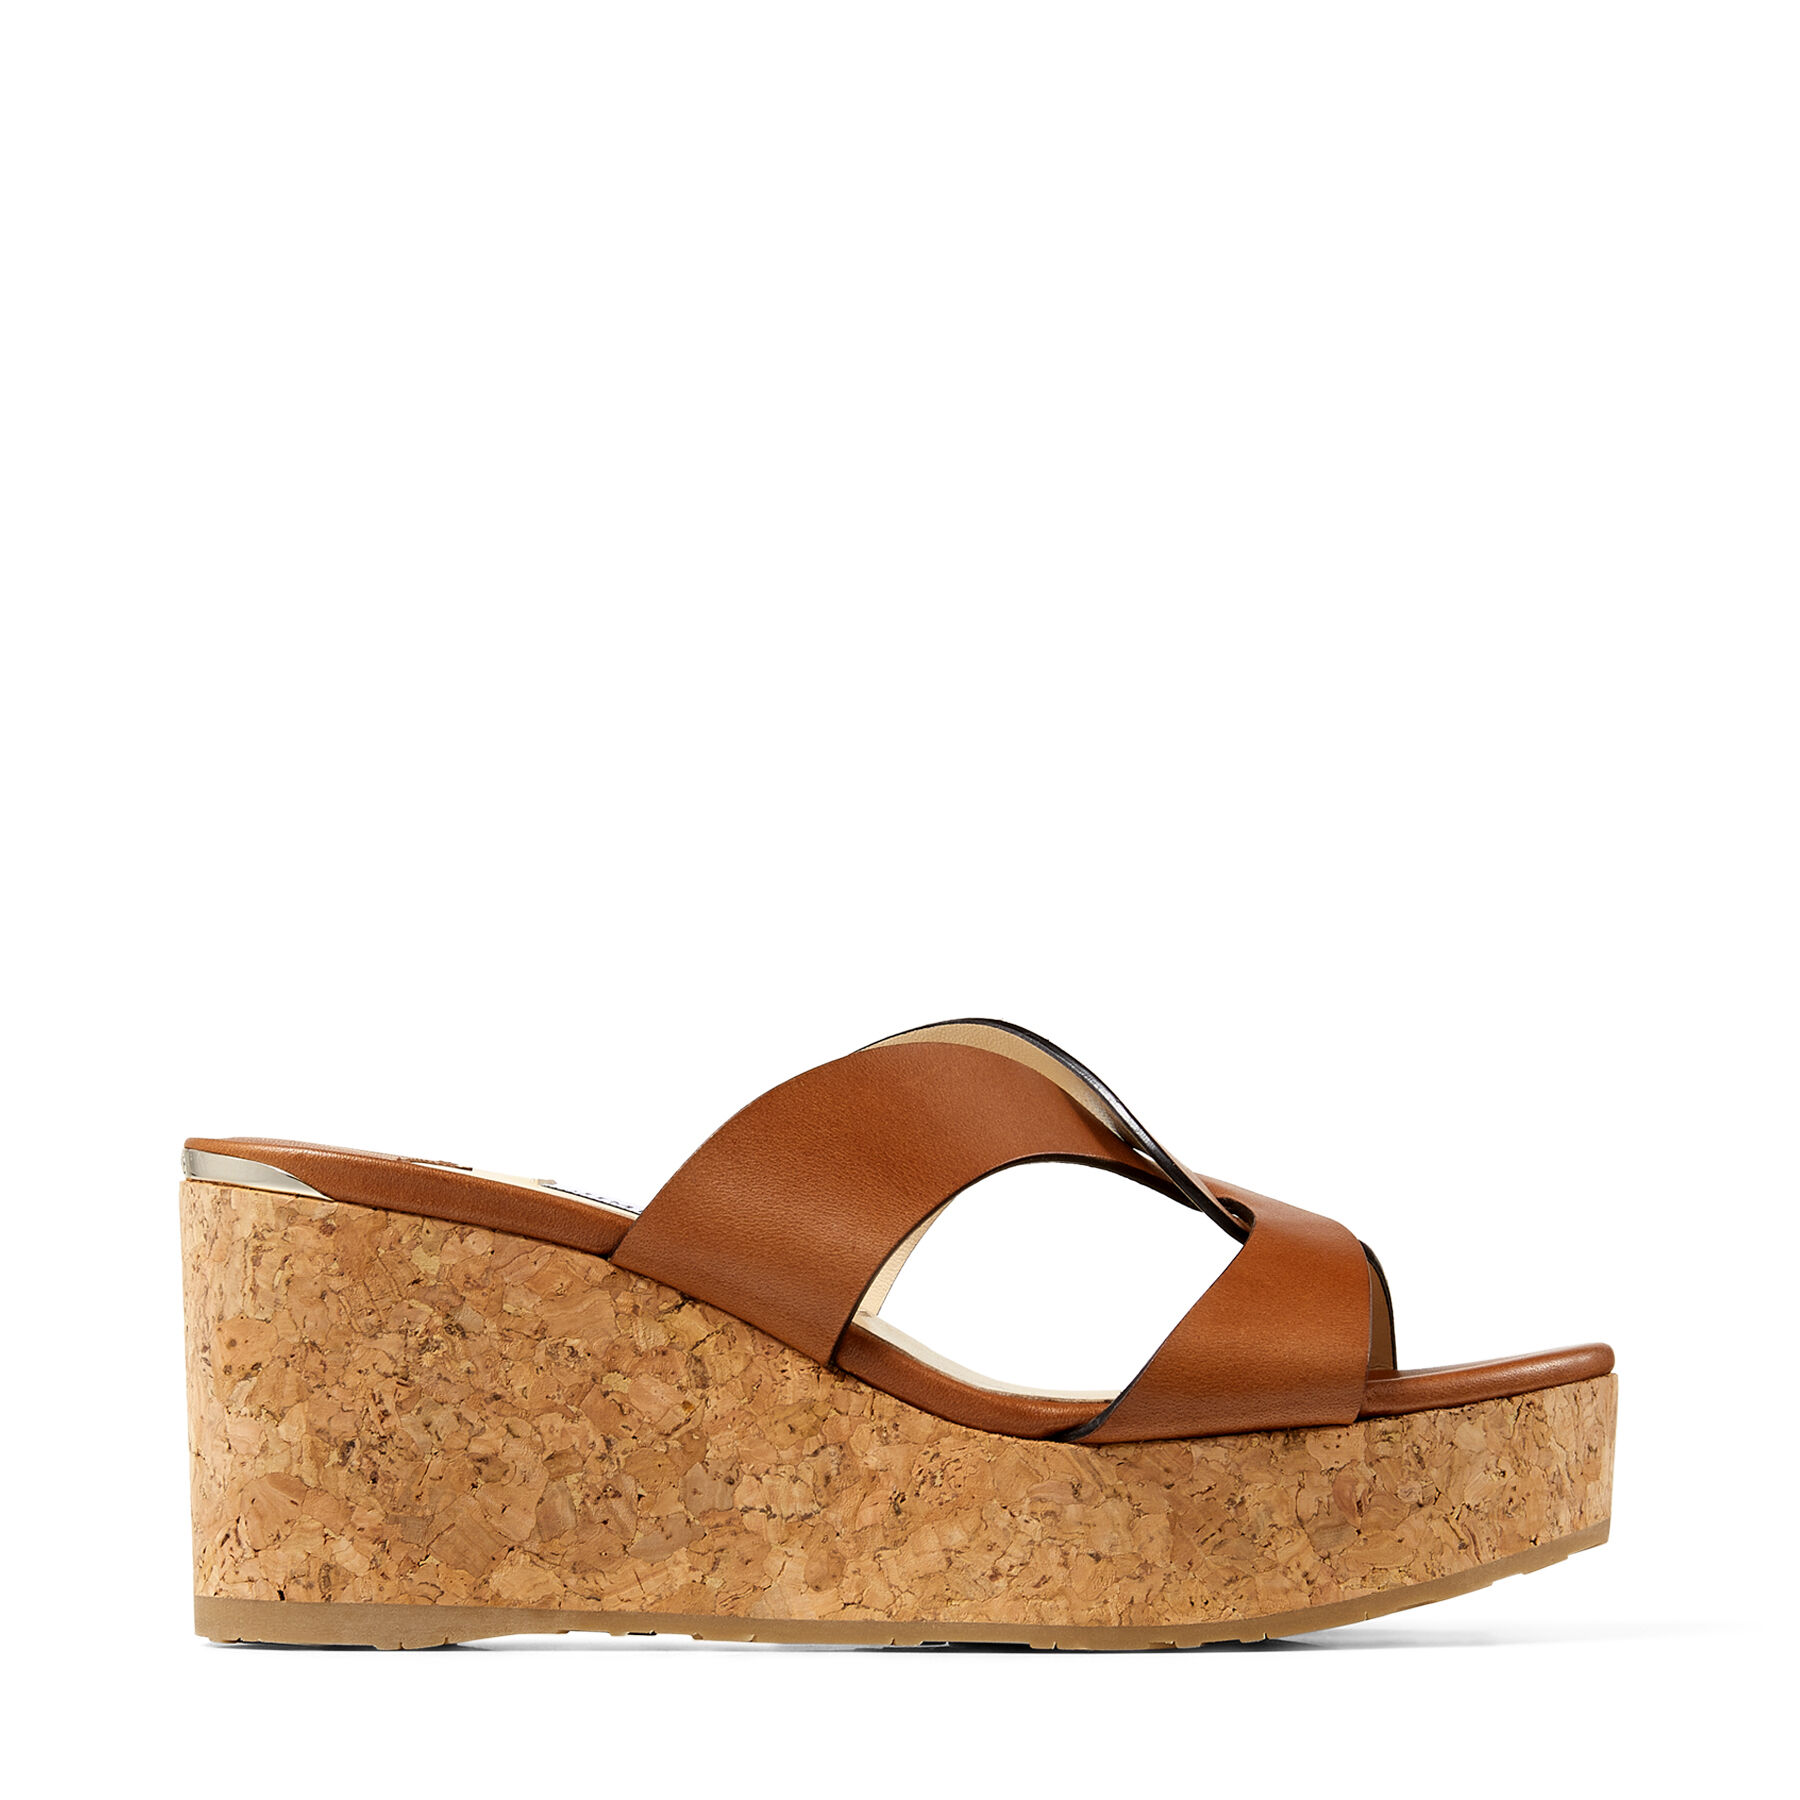 Cuoio Vachetta Leather Wedge Sandals with Crossover Straps | ATIA 75 ...